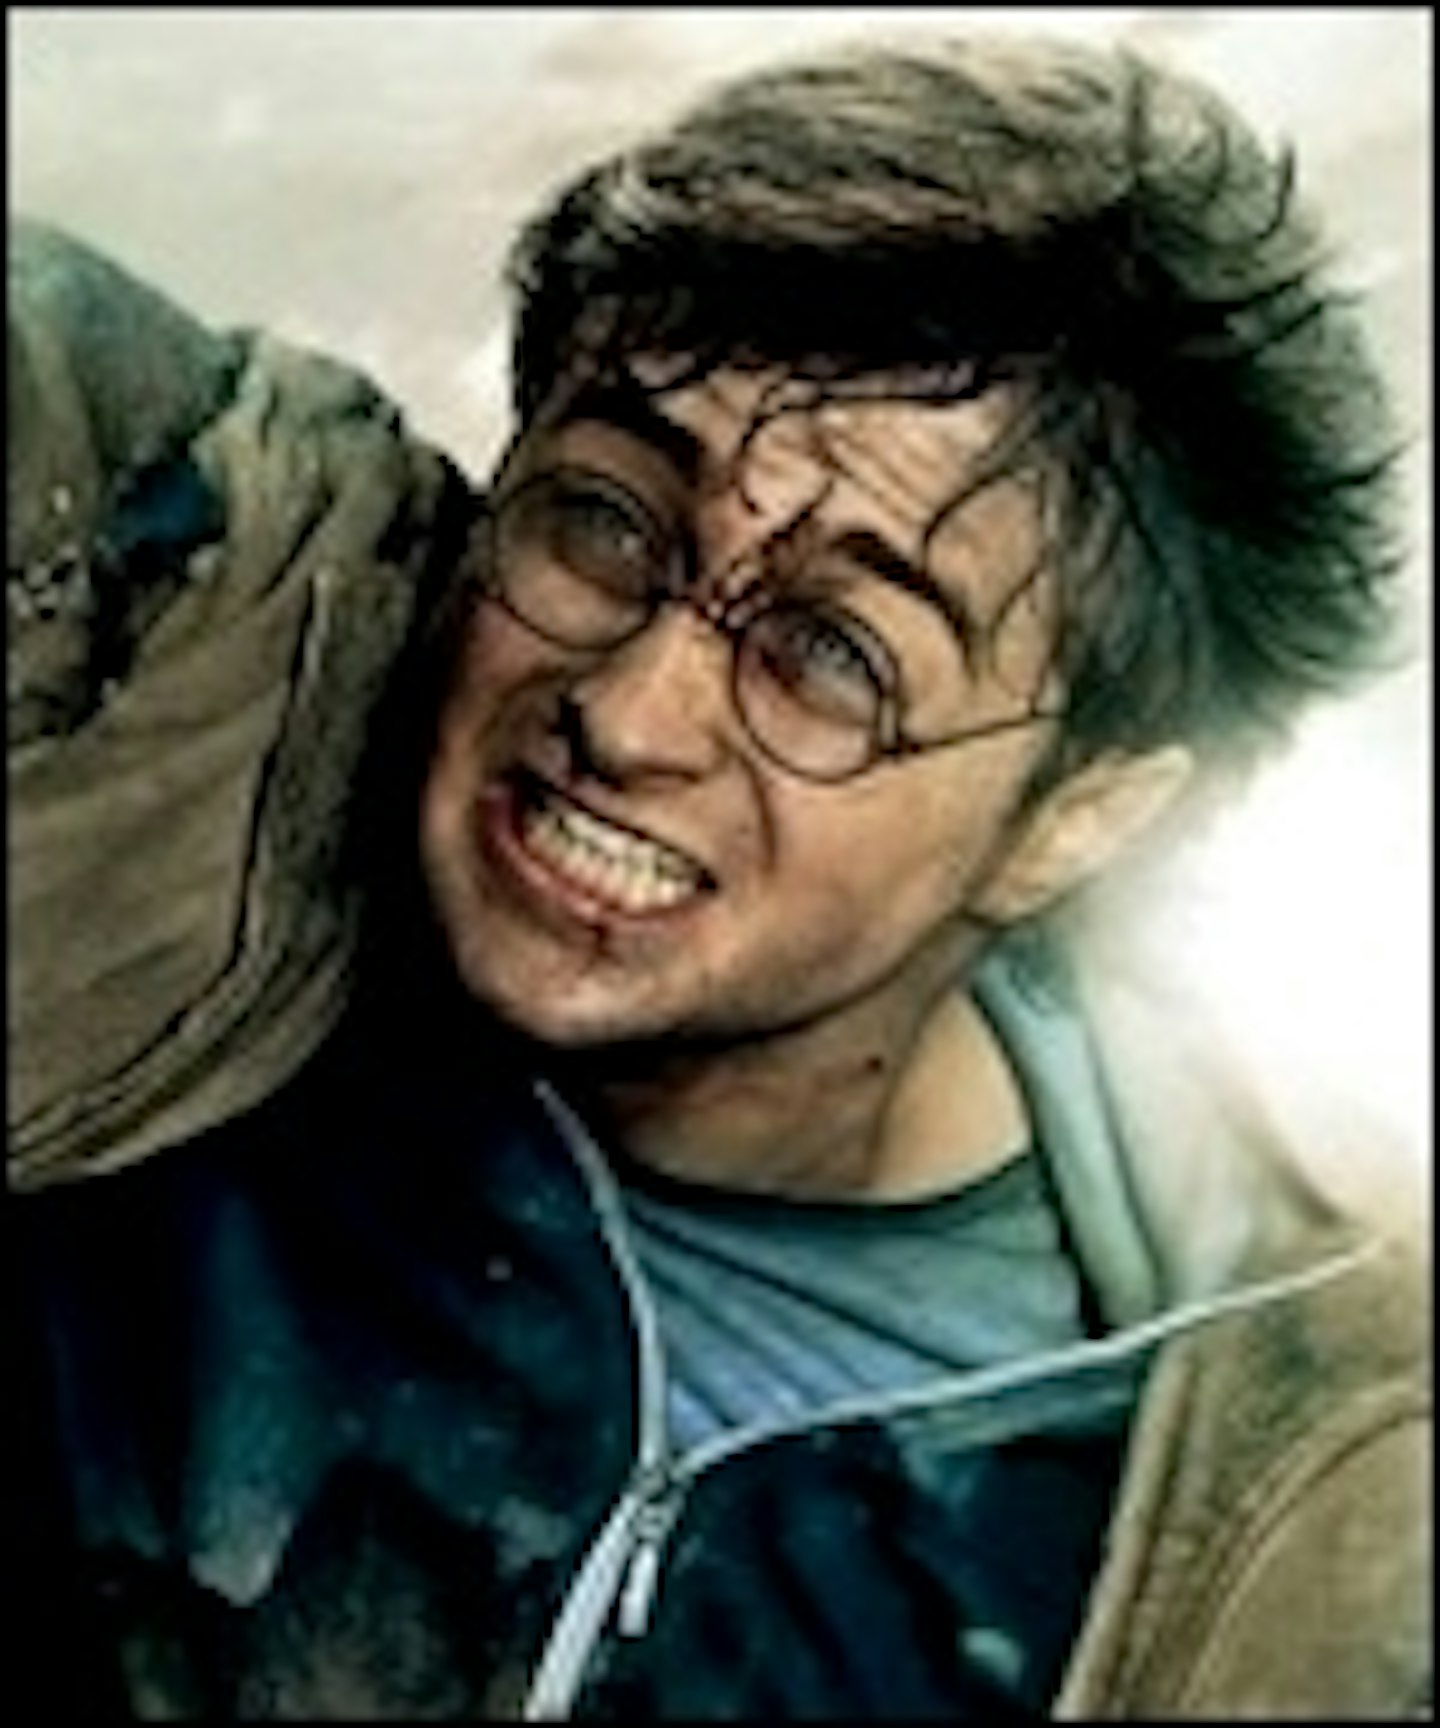 Brand New Deathly Hallows Posters Arrive